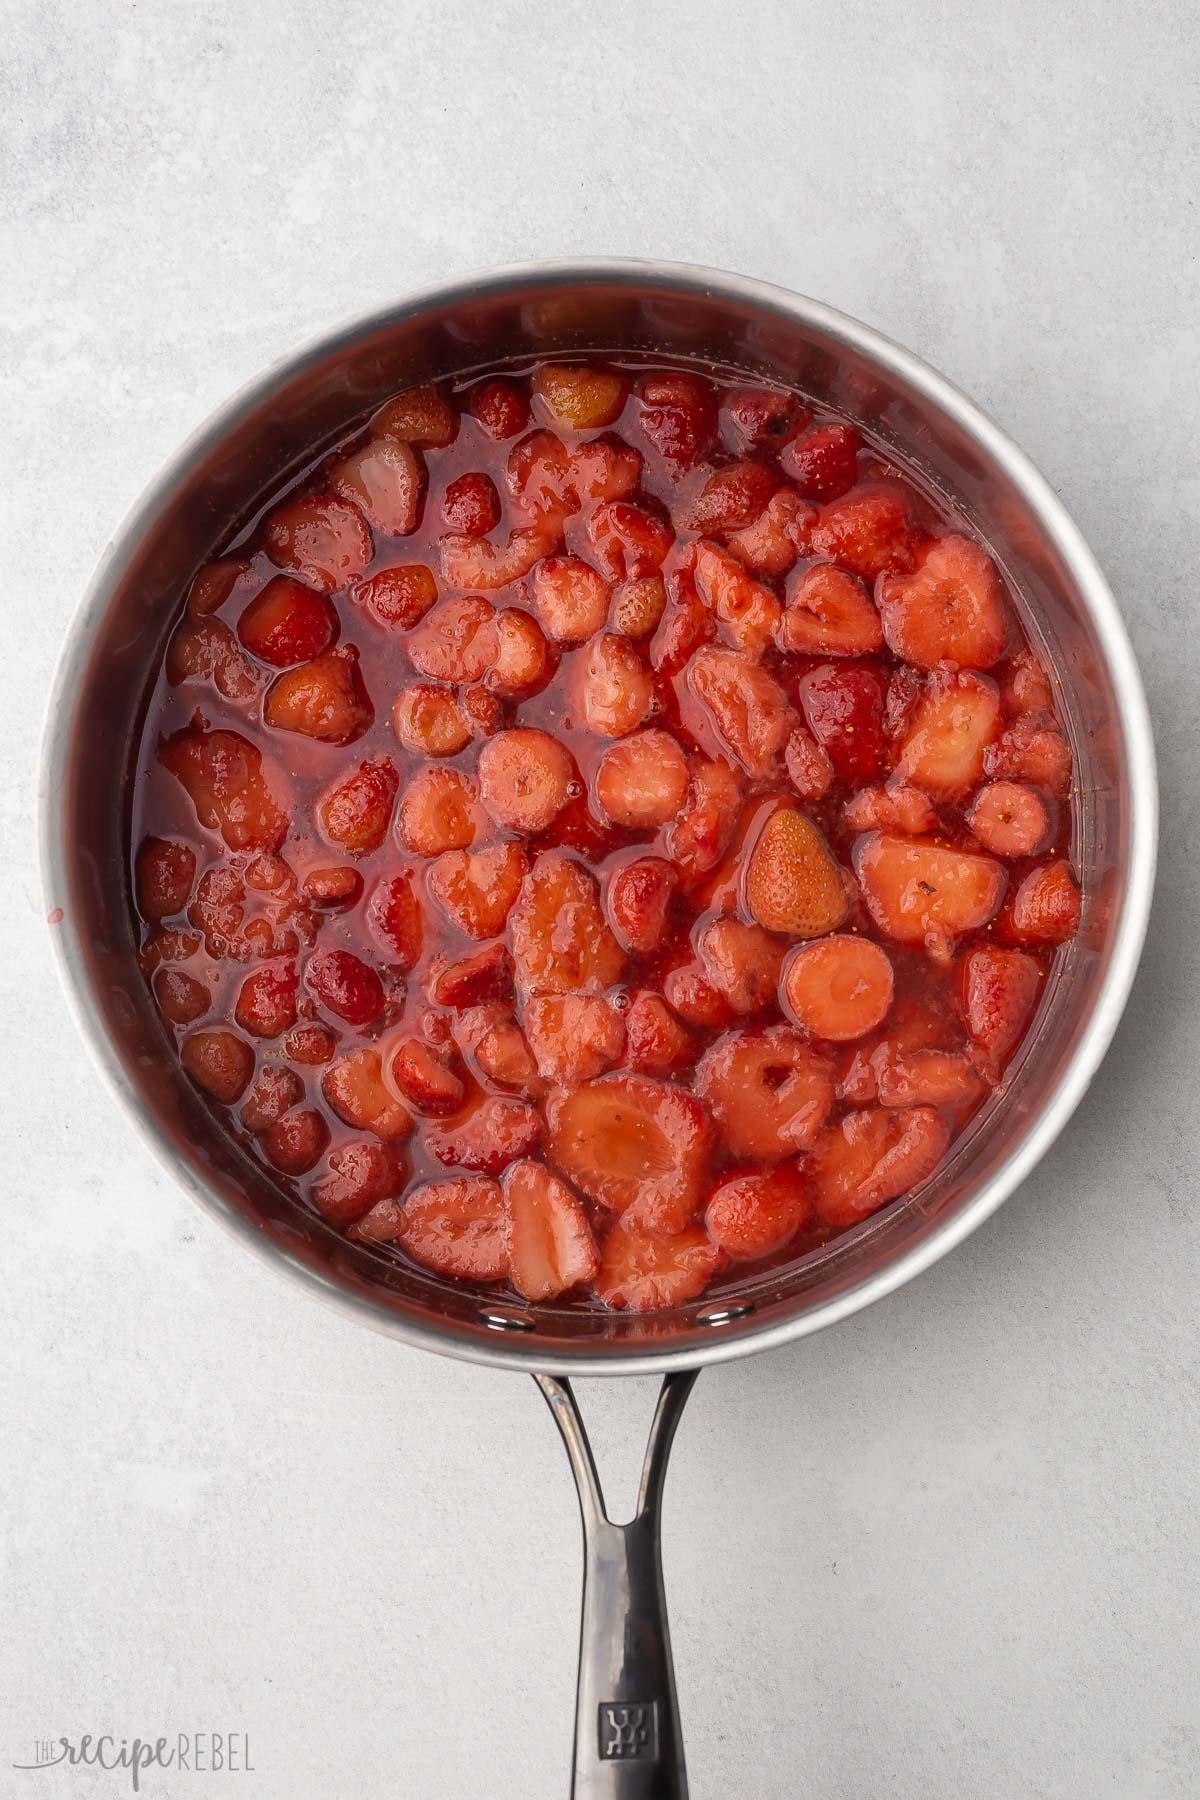 Top view of cooked strawberry mixture in a pan.